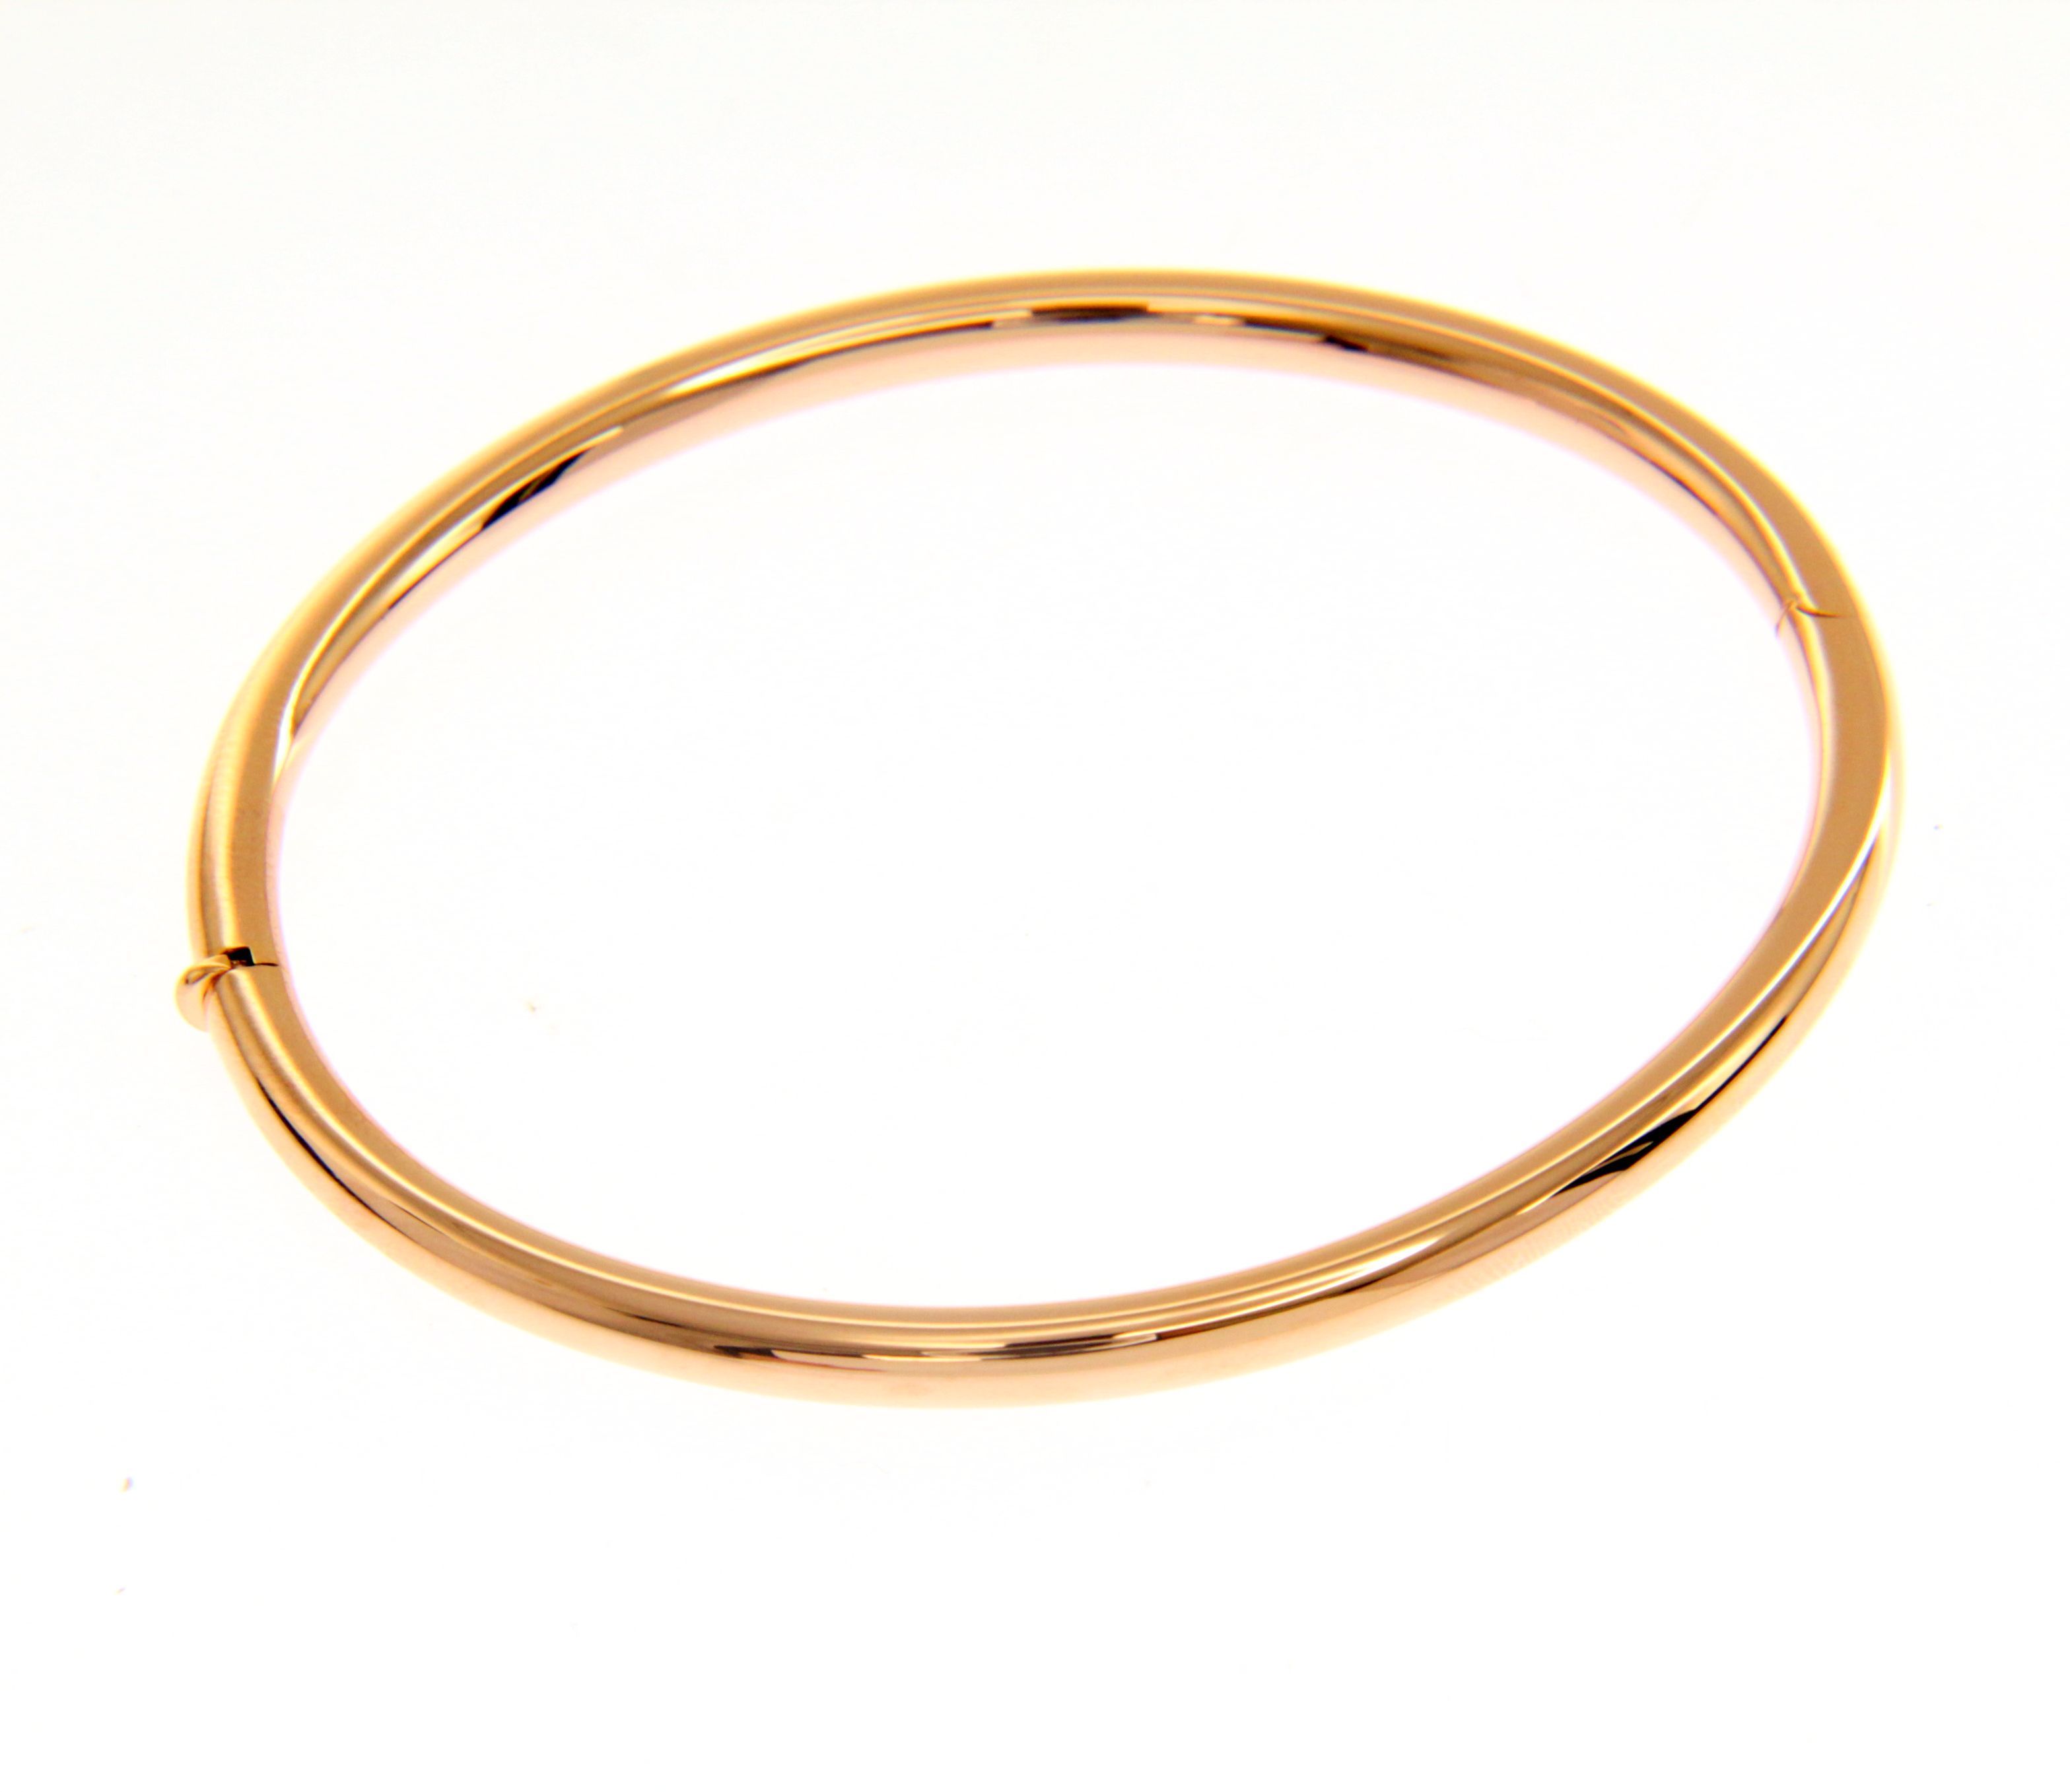 Rose gold oval bracelet with clasp k14 (code S205088)